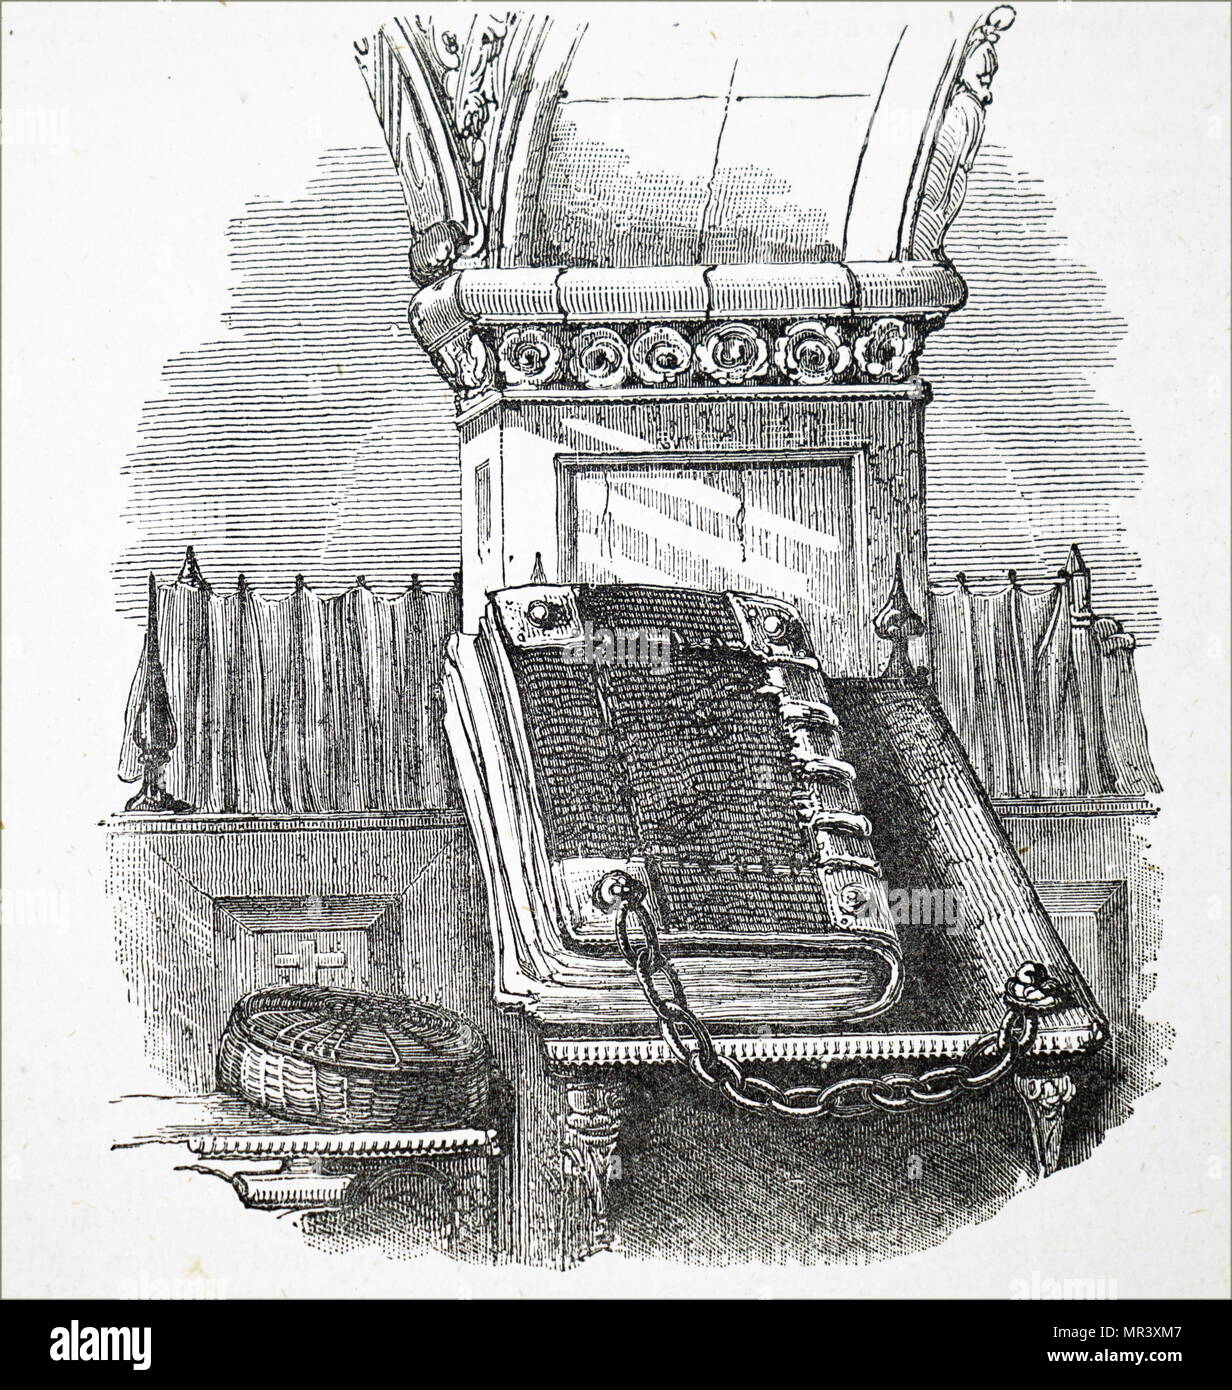 Engraving depicting a Bible chained to the Bible Stand. Dated 16th century Stock Photo